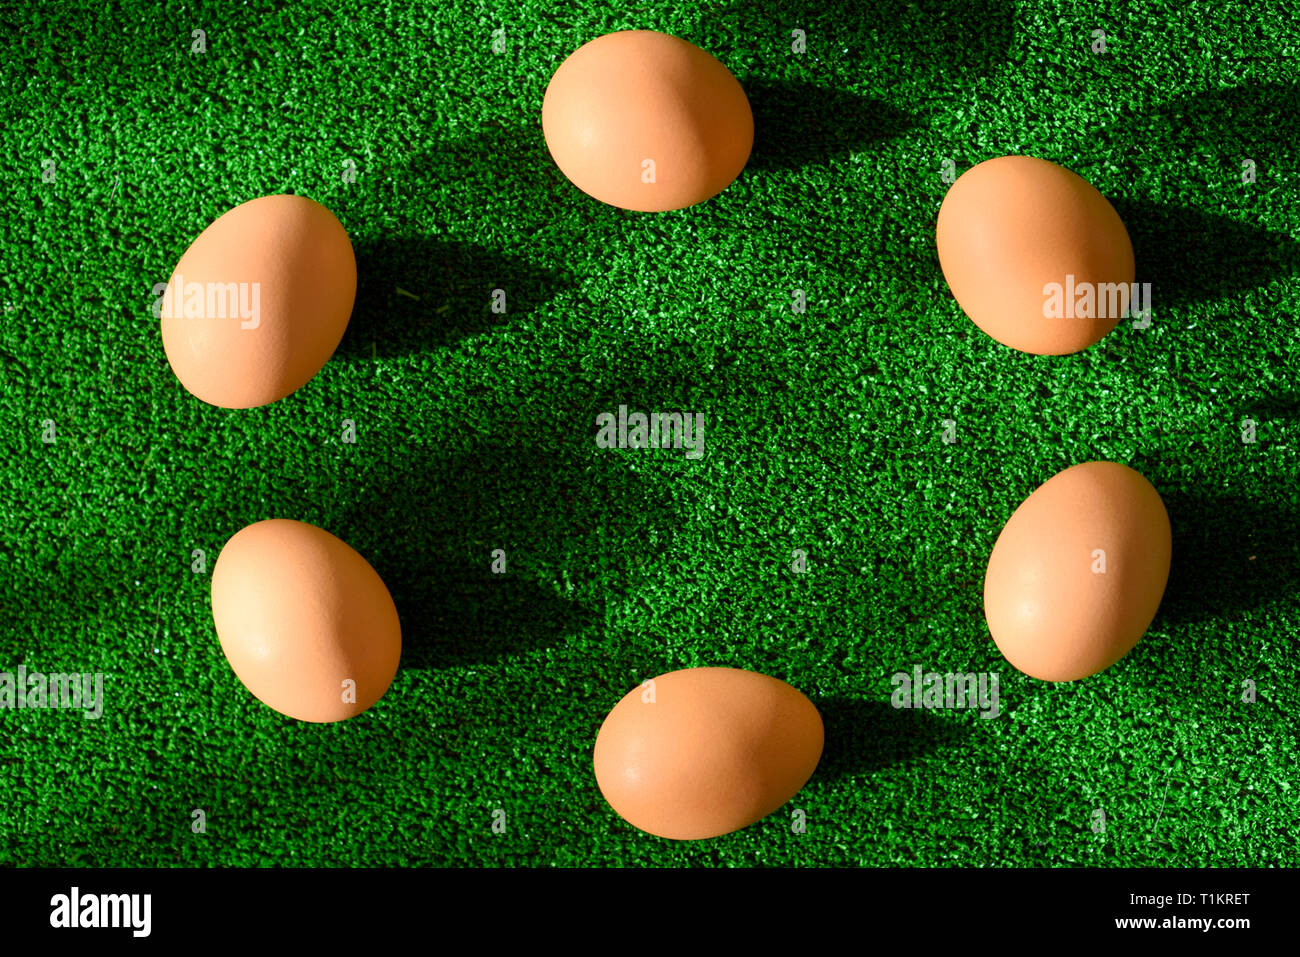 Top view of easter decoration - eggs arranged in a circle, on grass as a green background. Stock Photo